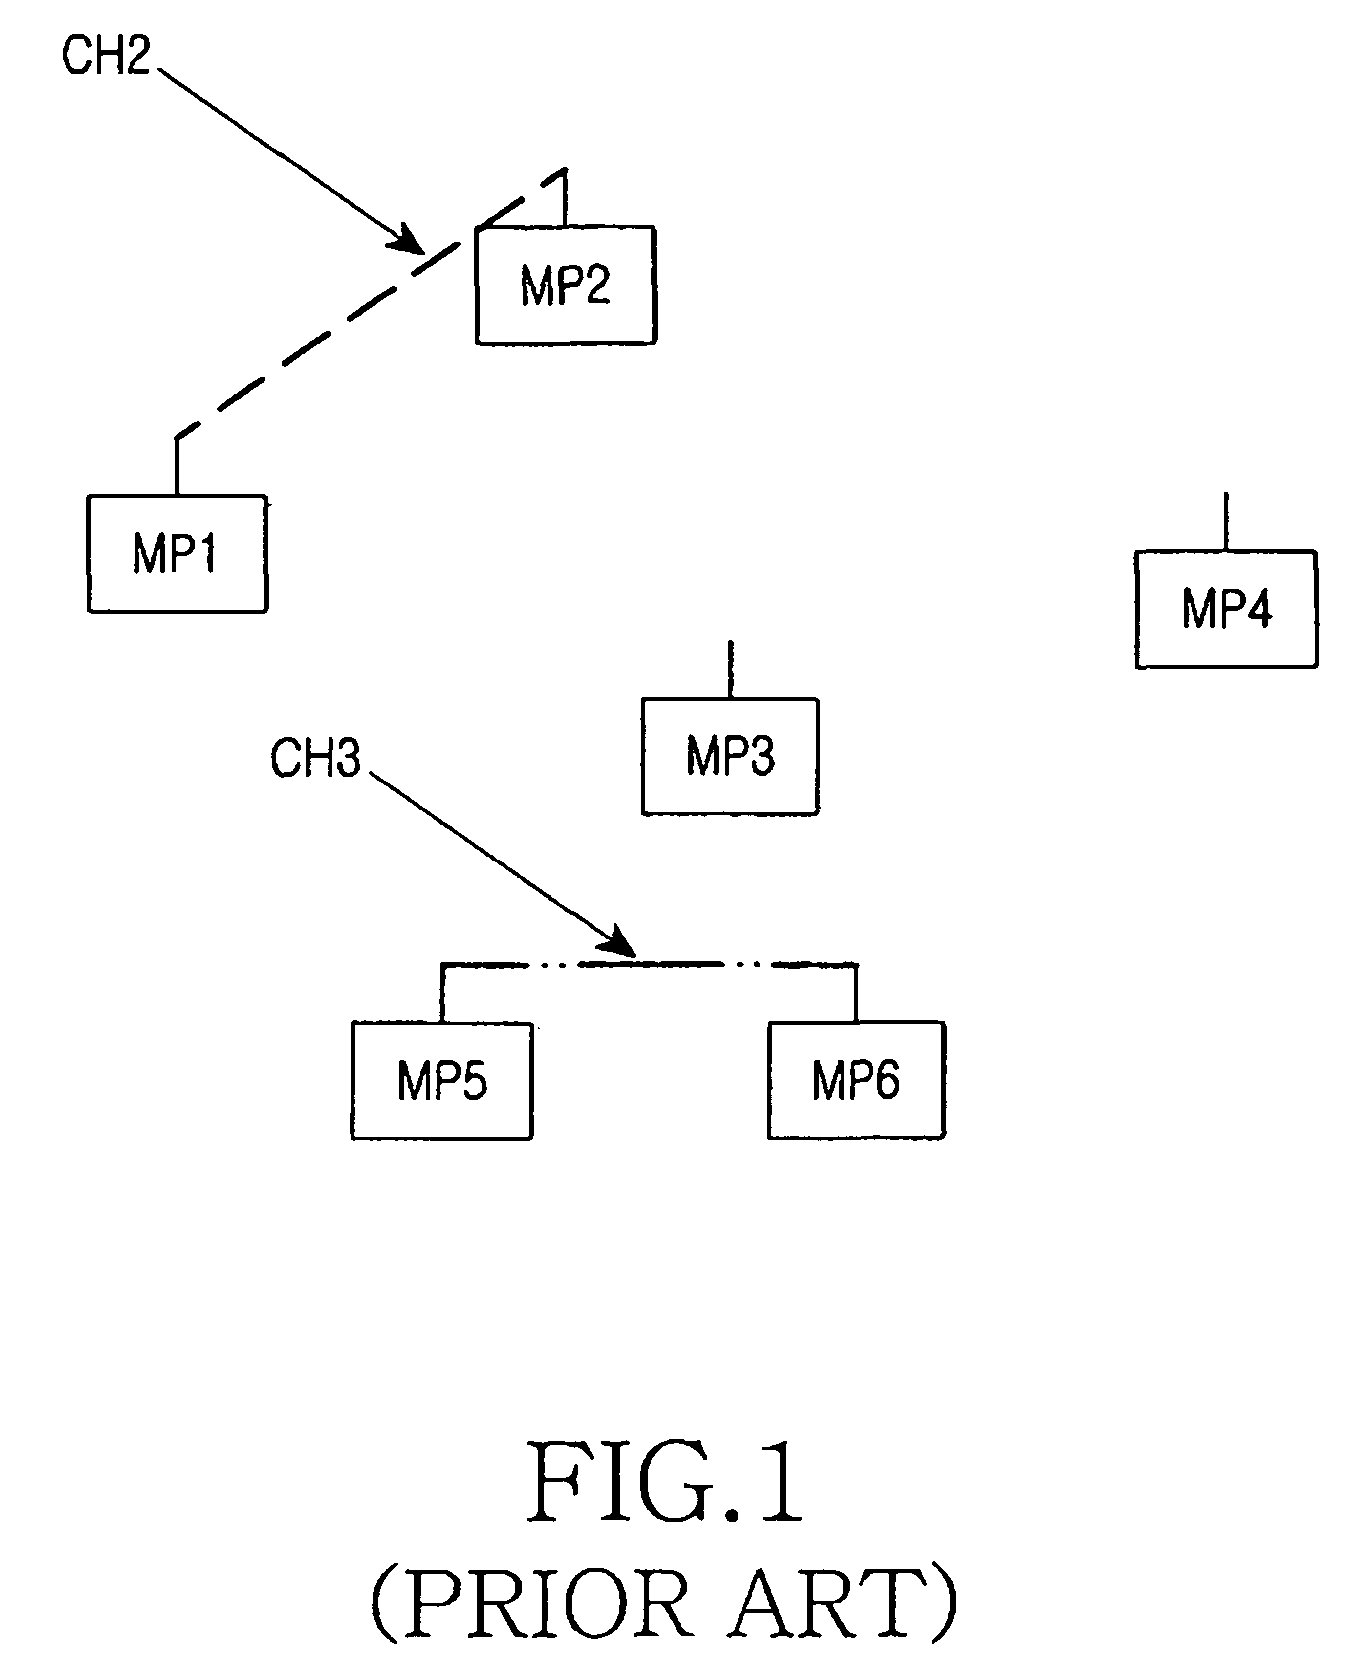 Multi-channel scheduling method for WLAN devices with a single radio interface